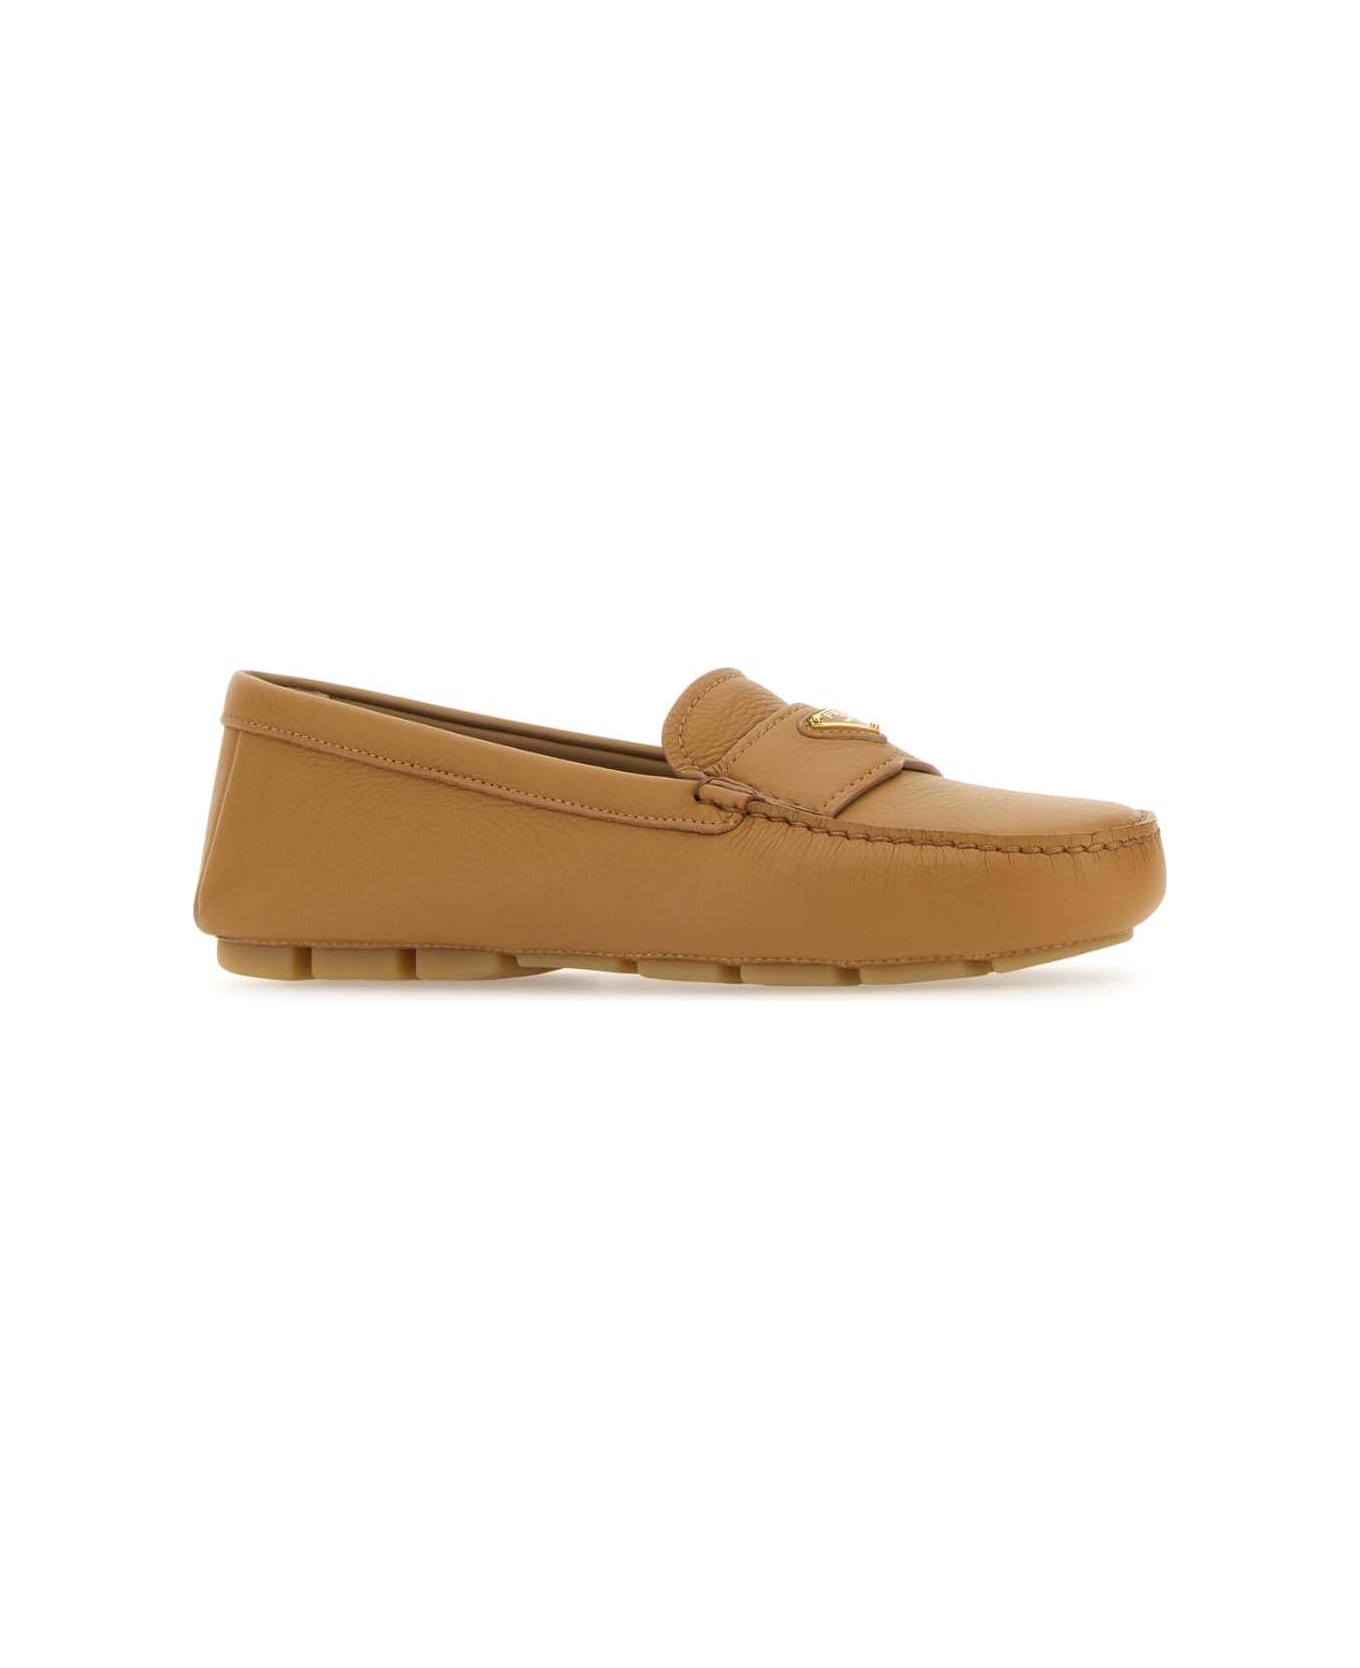 Prada Camel Leather Loafers - NATURALE